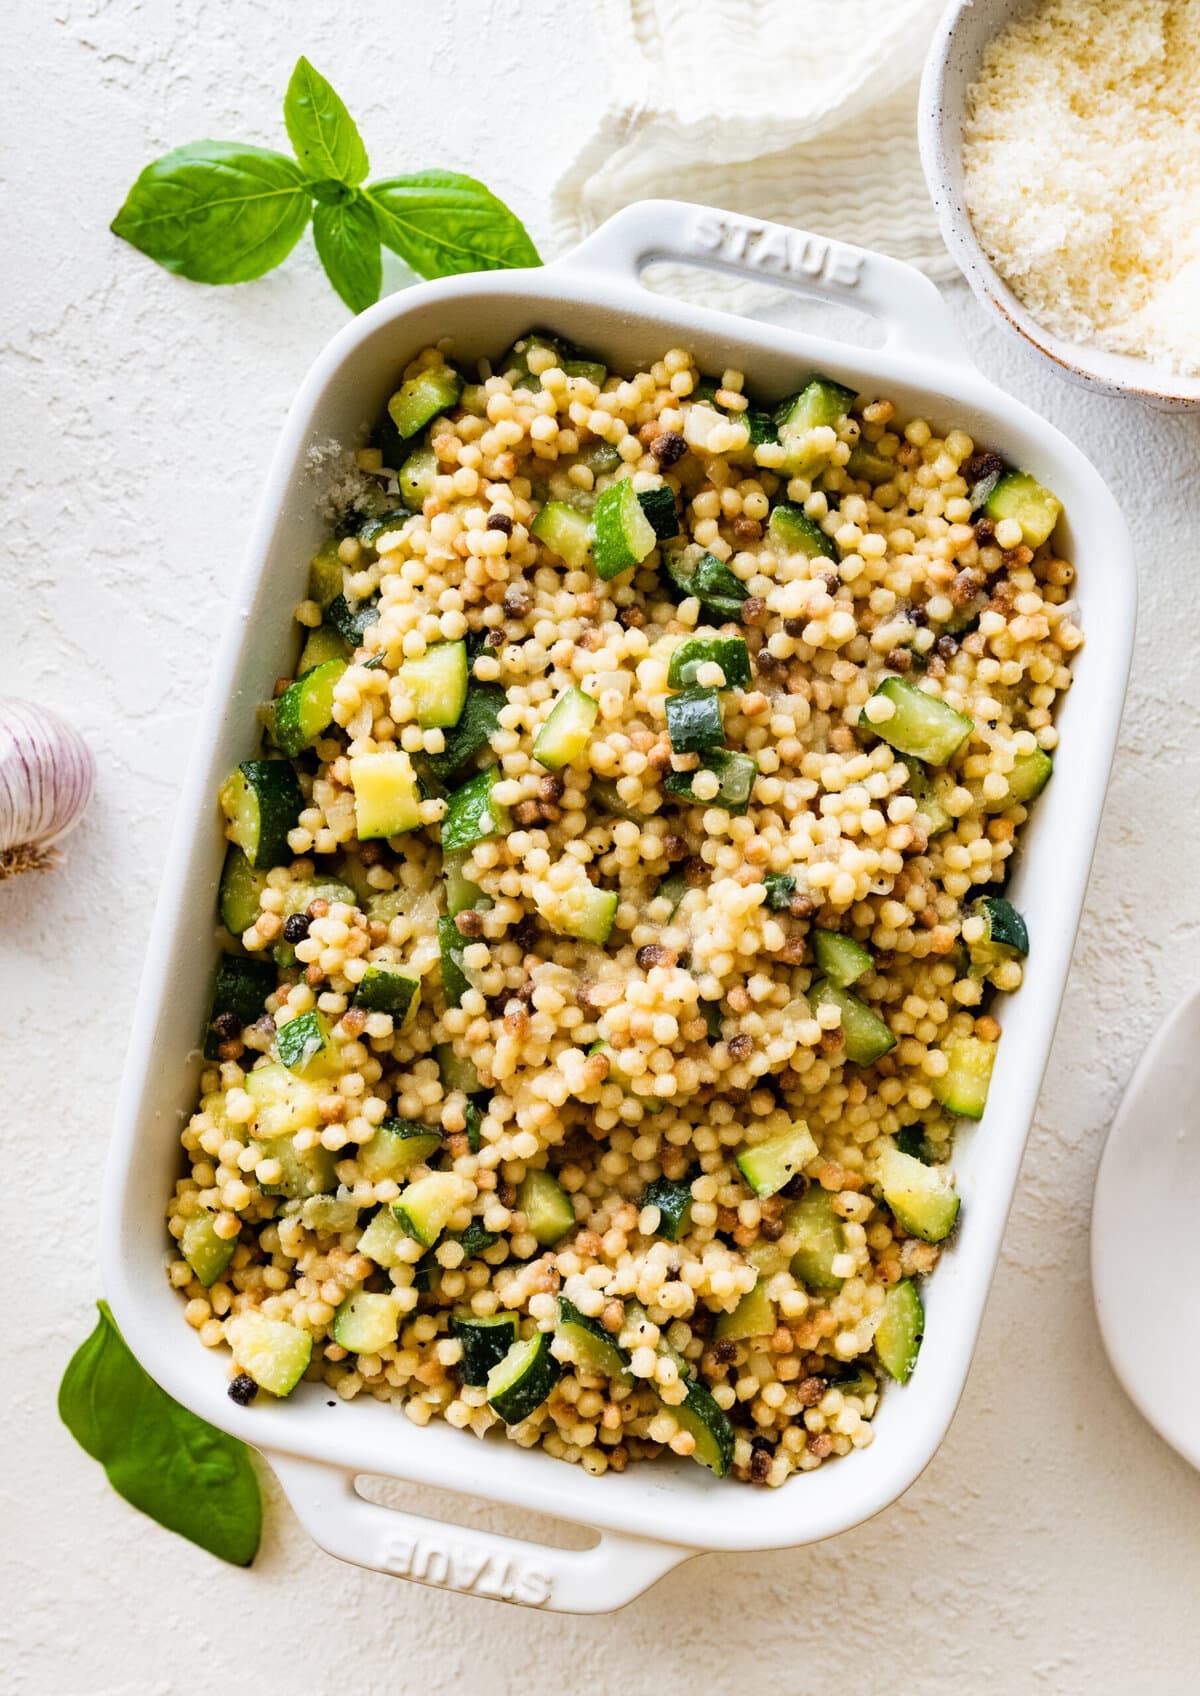 Step by step instructions Fregola Sarda Pasta Recipe with Zucchini and Cheese- place finished pasta and zucchini mixture in oven safe pan. Layer with cheese. Add more of the pasta mixture.